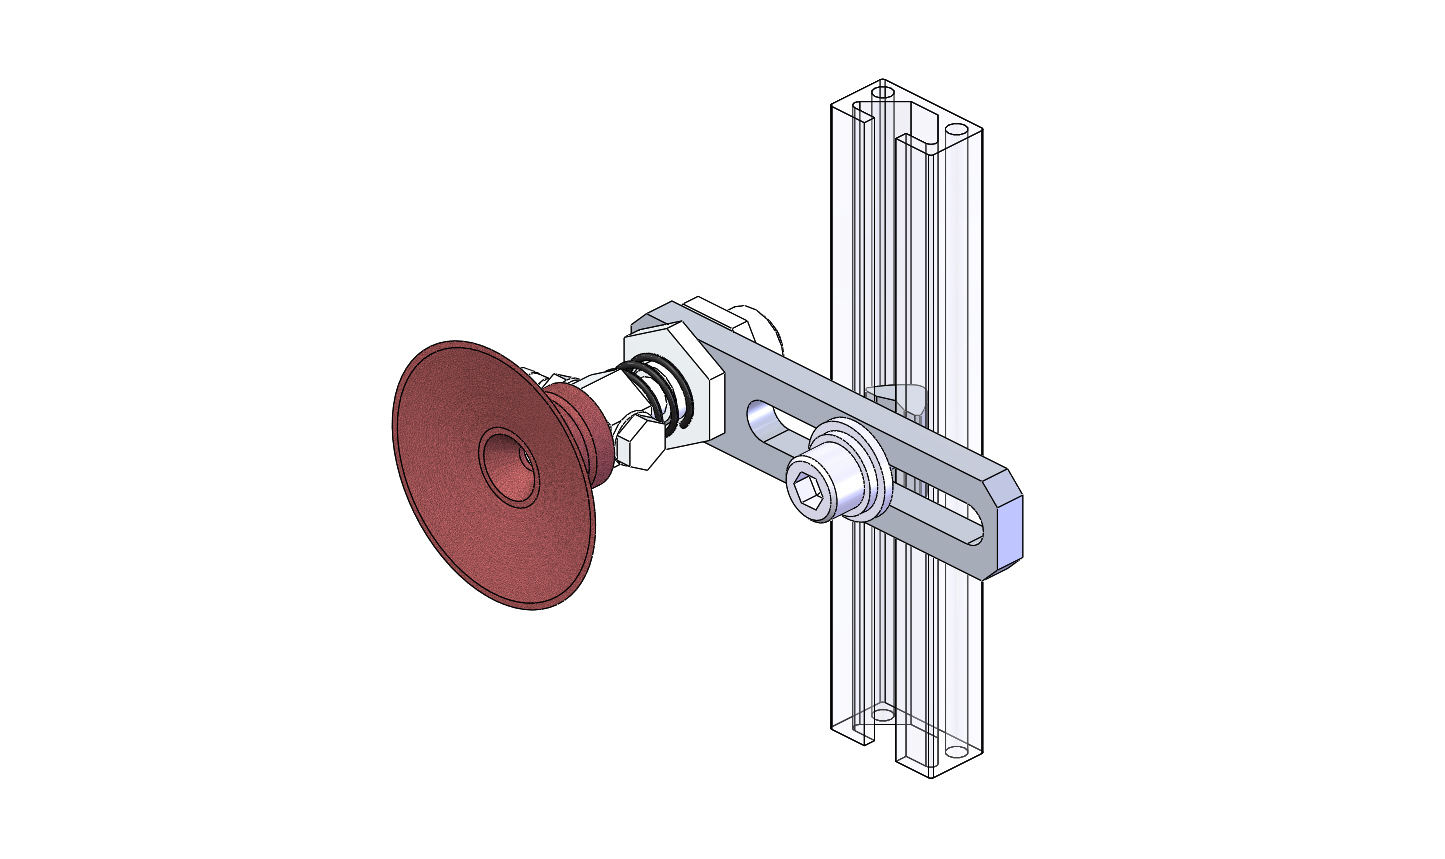 Suction Module for Let's Joint